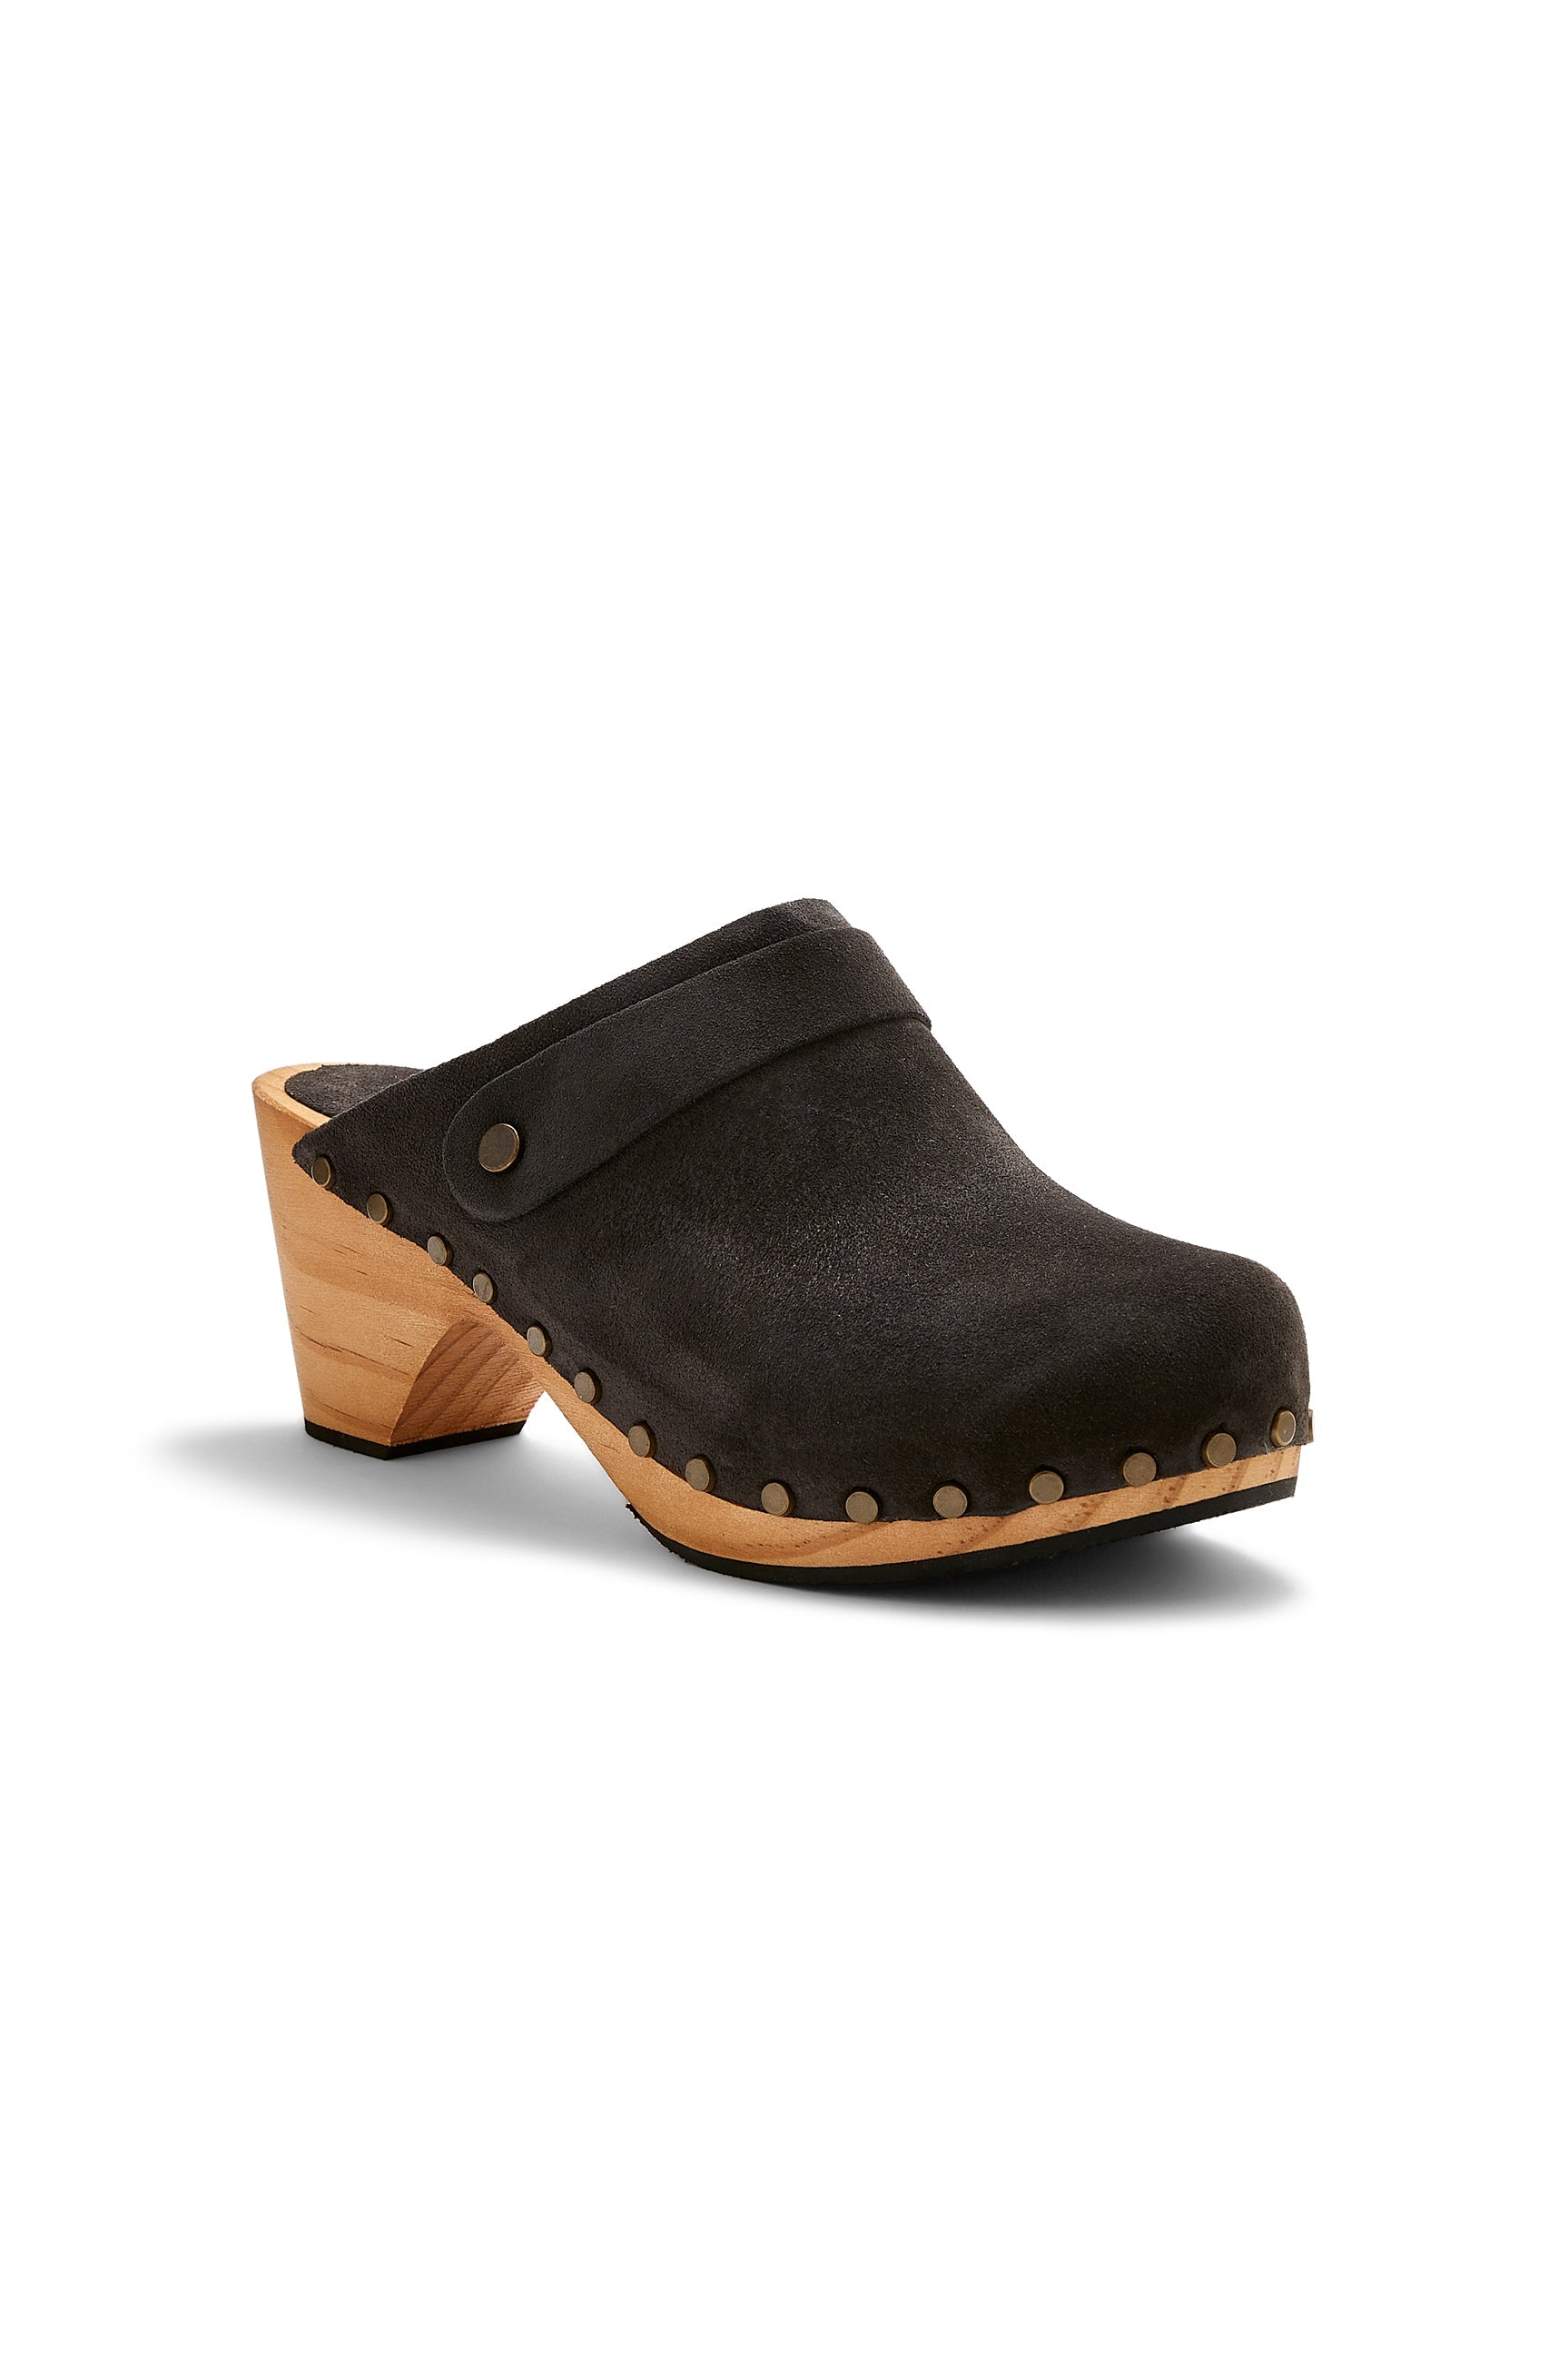 high heel classic clogs in coal suede - ships end of April Clogs lisa b. 